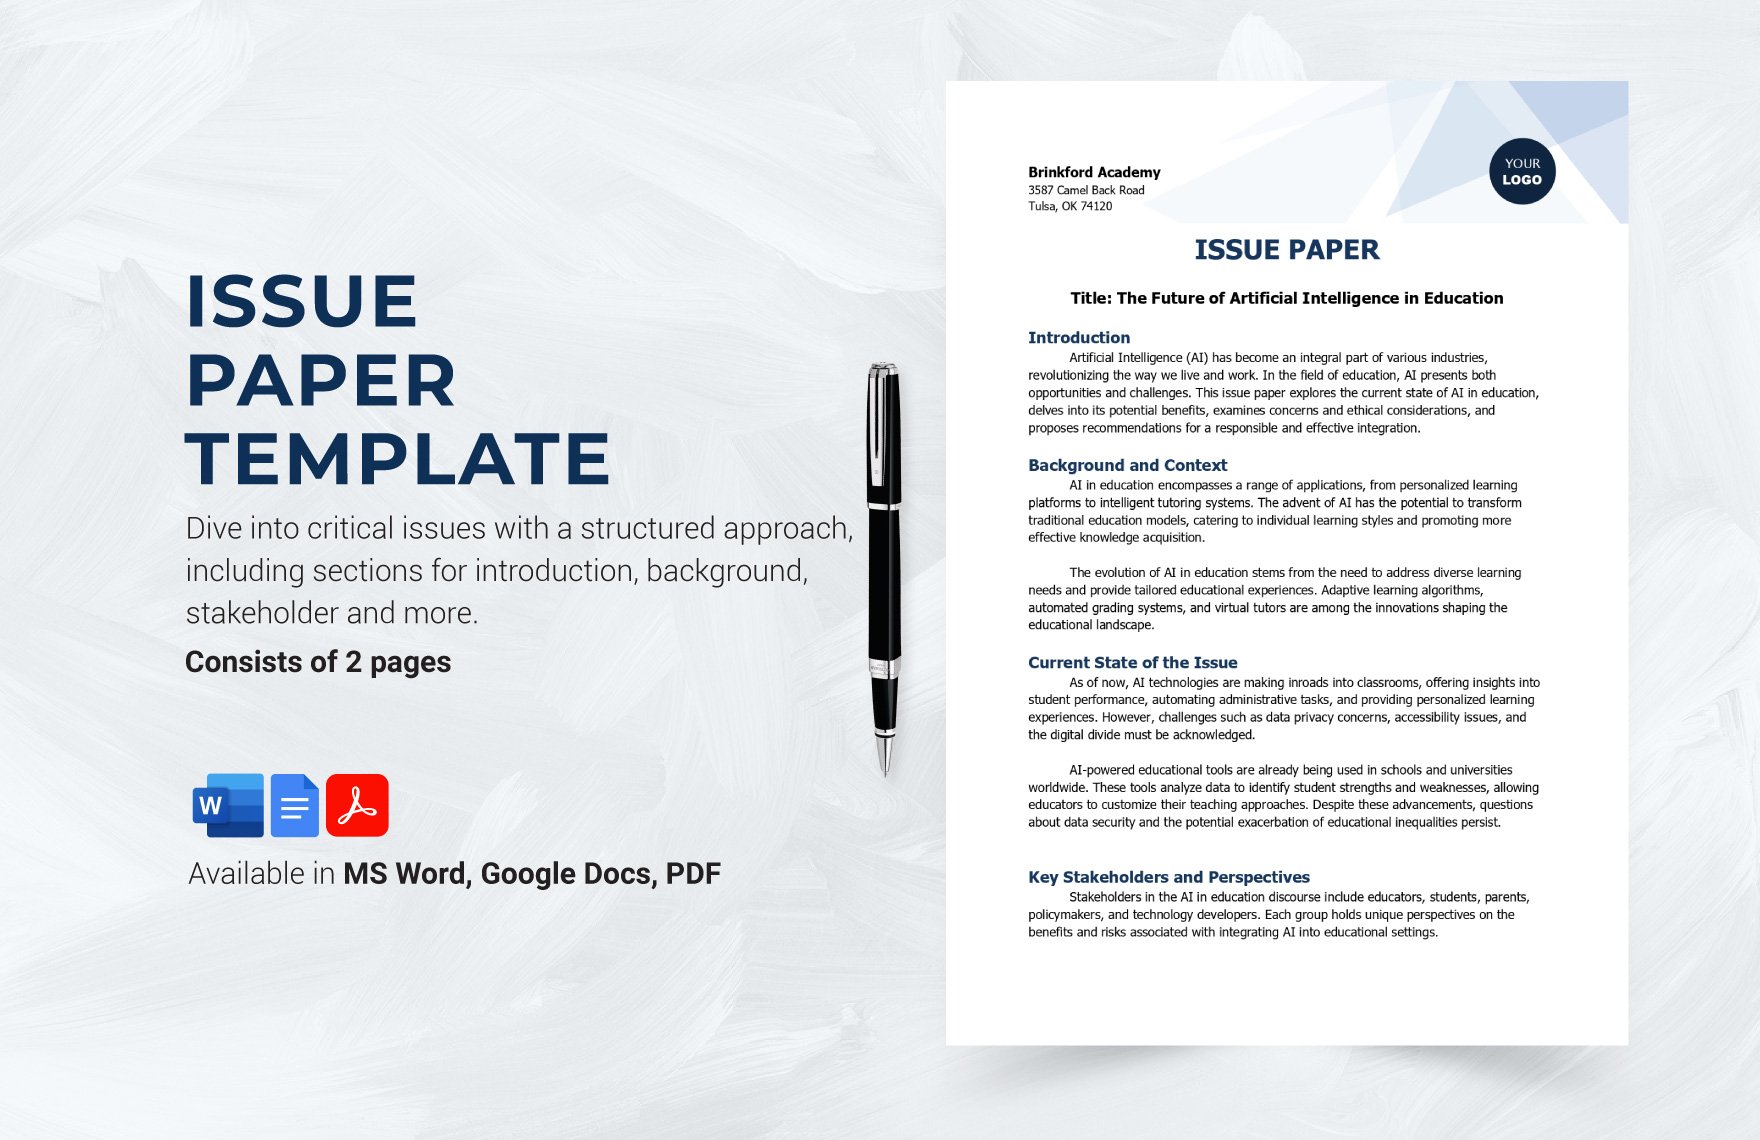 Free Issue Paper Template in Word, Google Docs, PDF